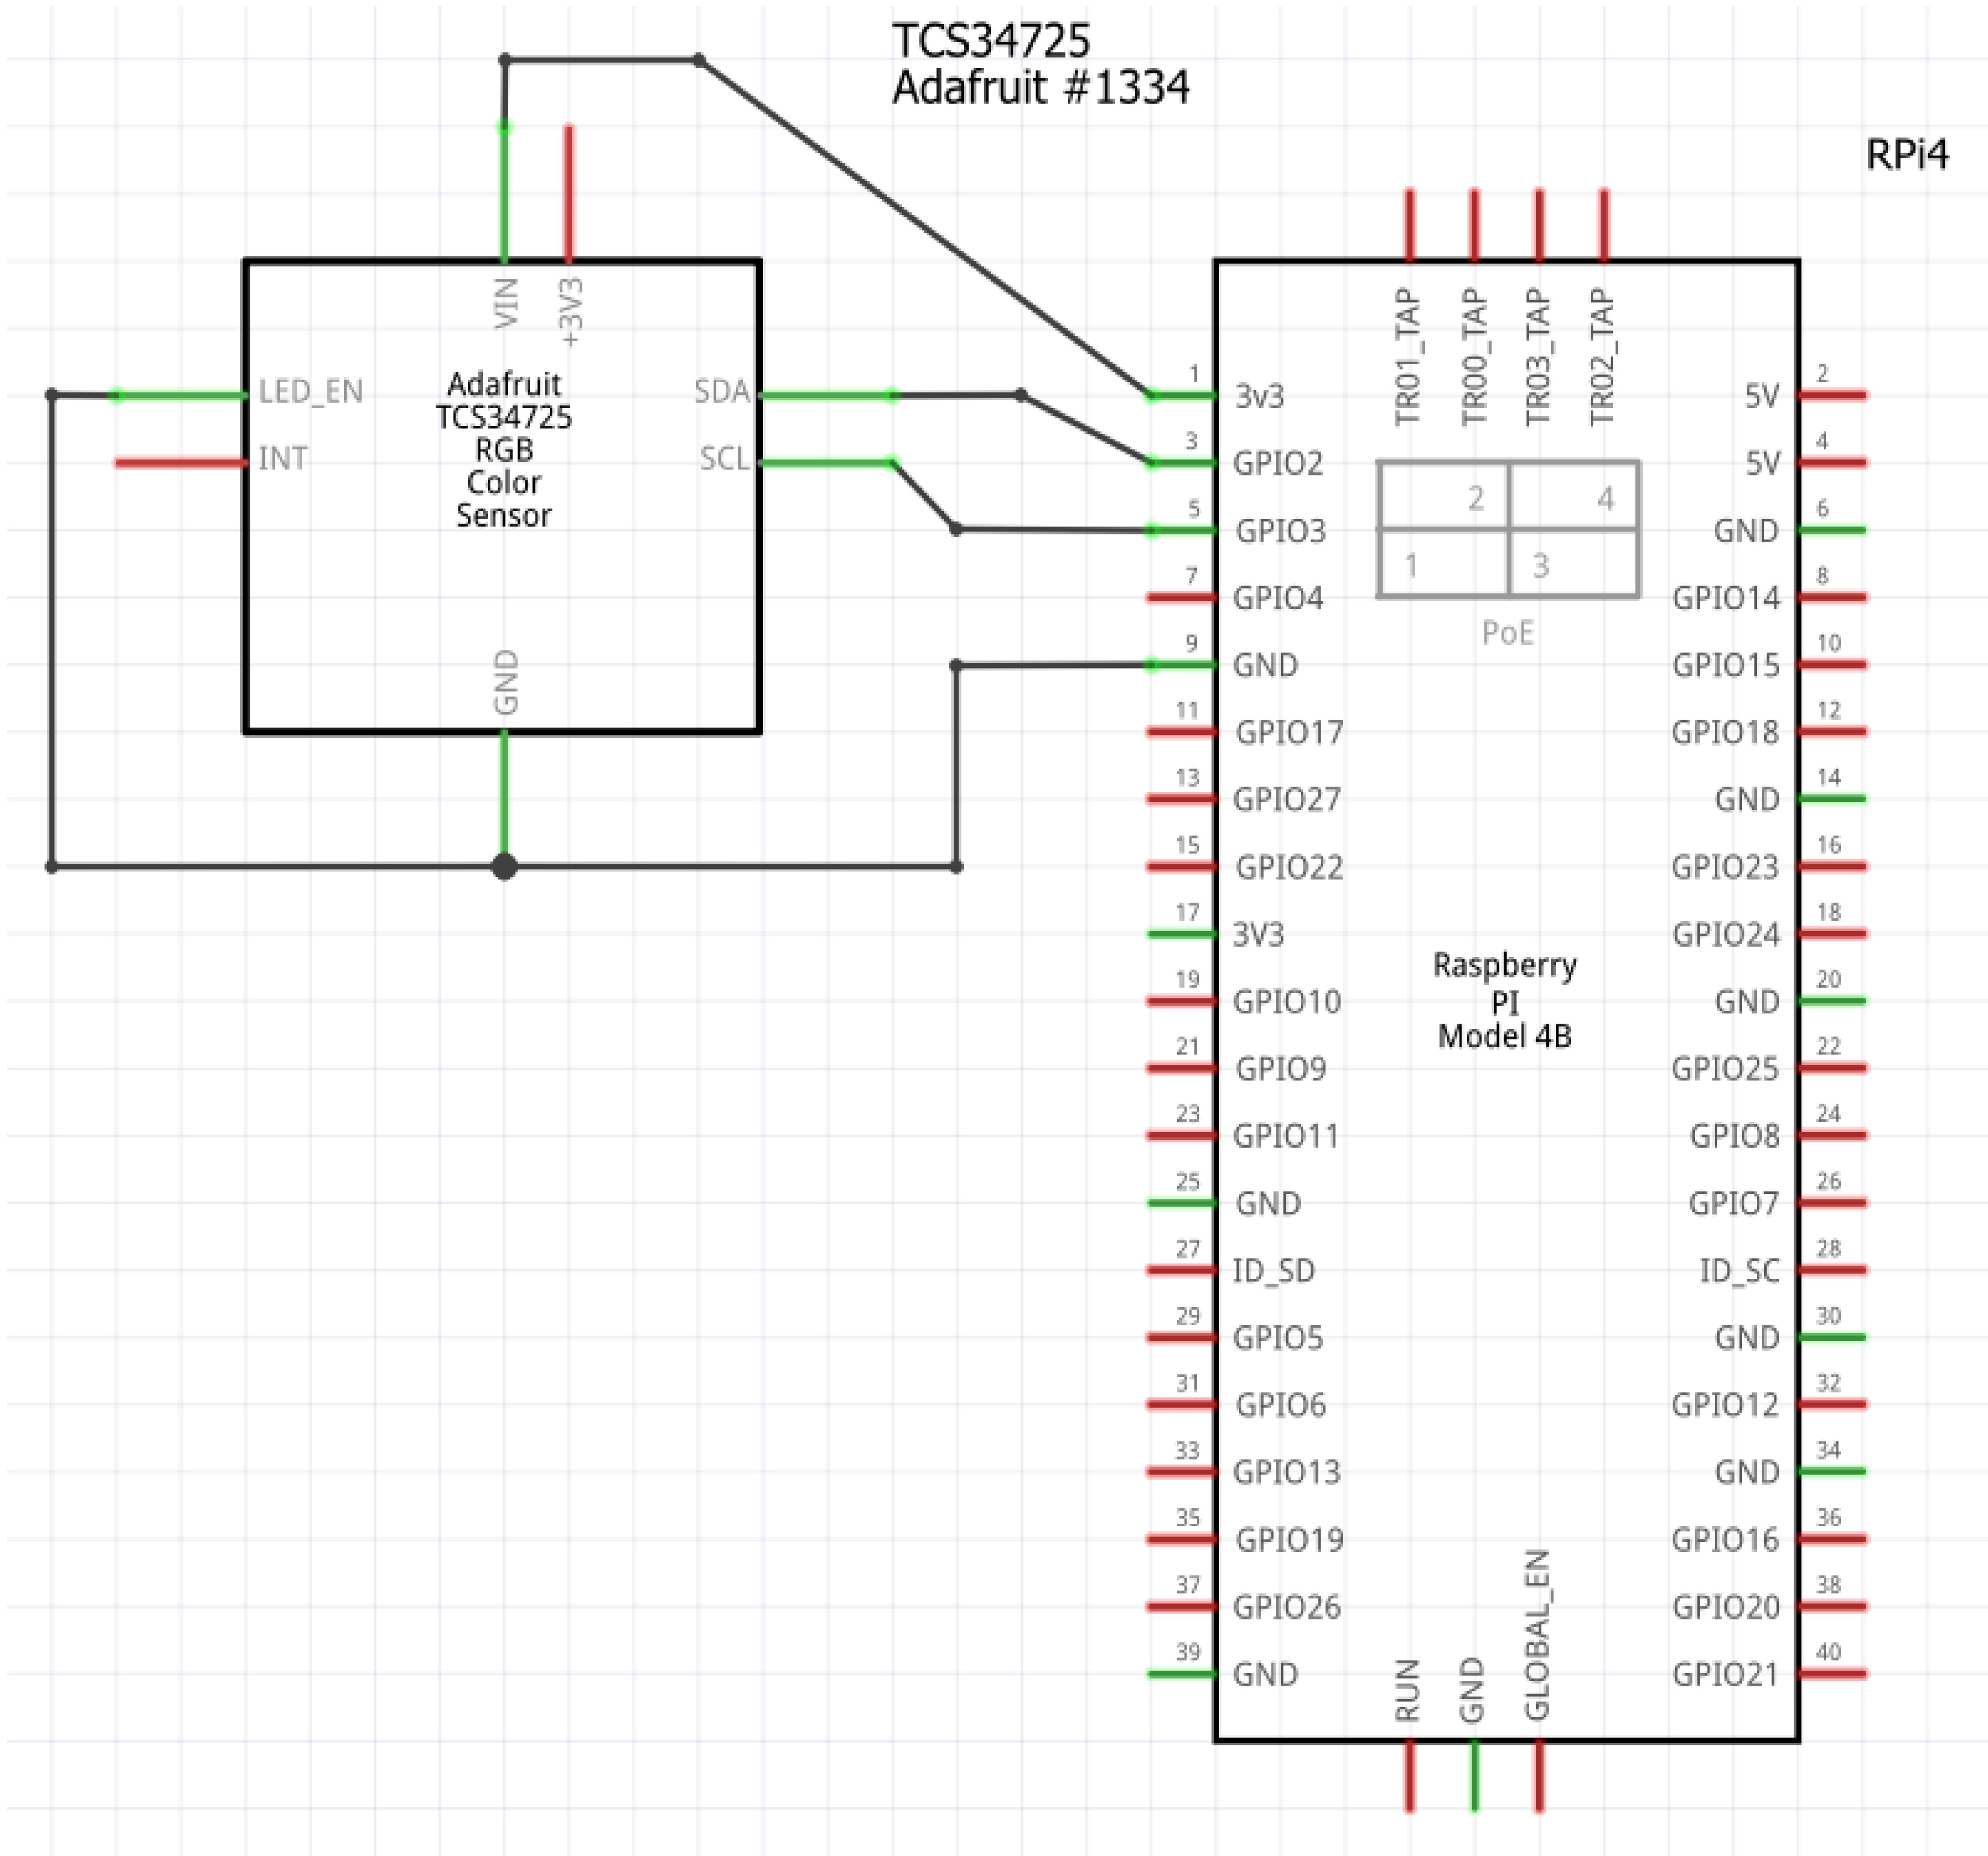 Schematic diagram of RPi4 and TCS34725.